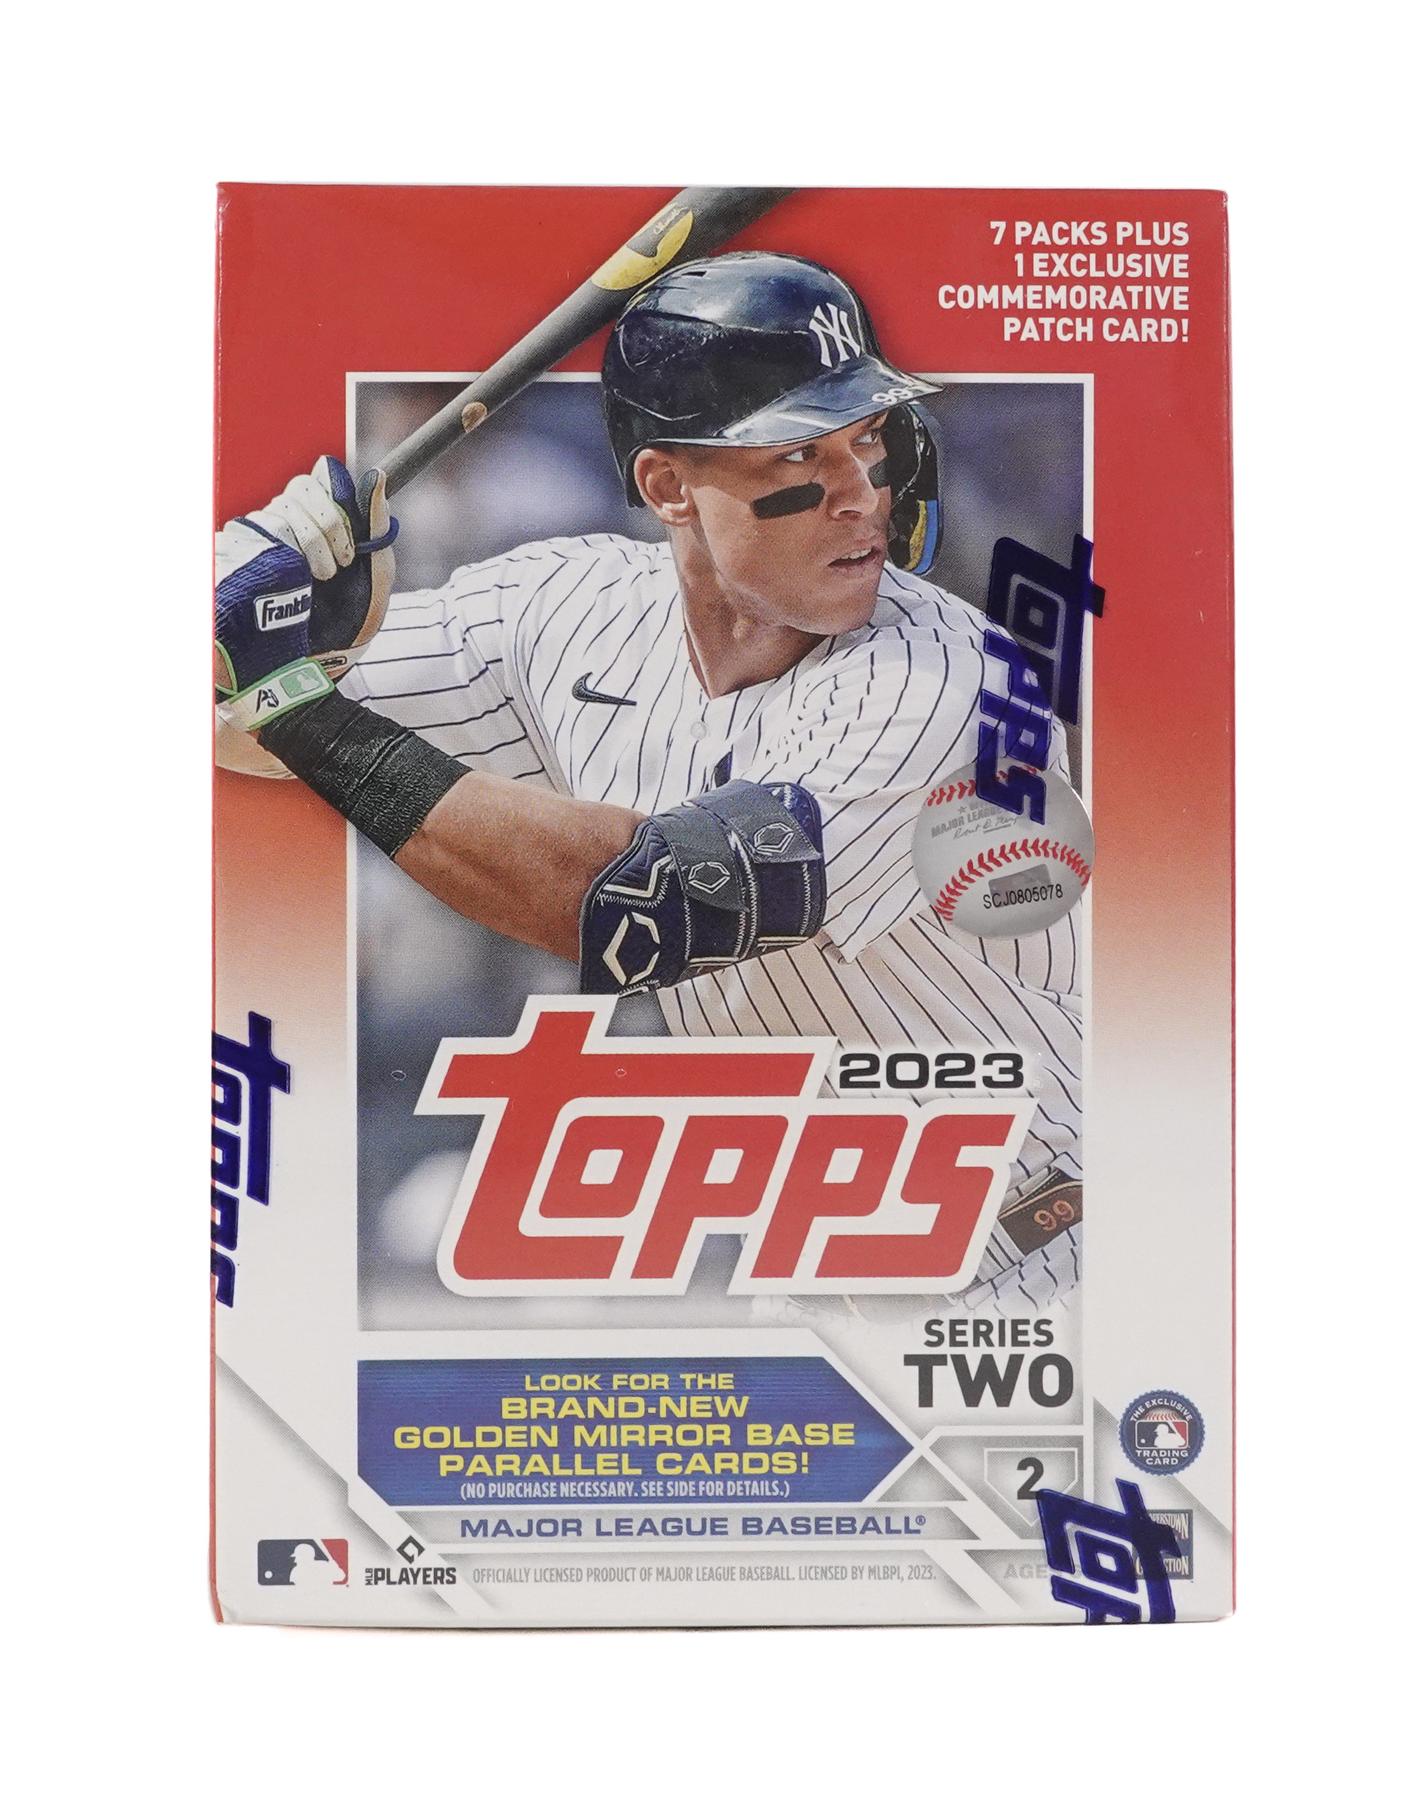 Seattle Mariners 2023 Topps (Series 1 and 2) Mariners Team Set with (20)  Cards! Plus the 2022 Topps Baseball Team Set (Series 1 and 2) with (22)